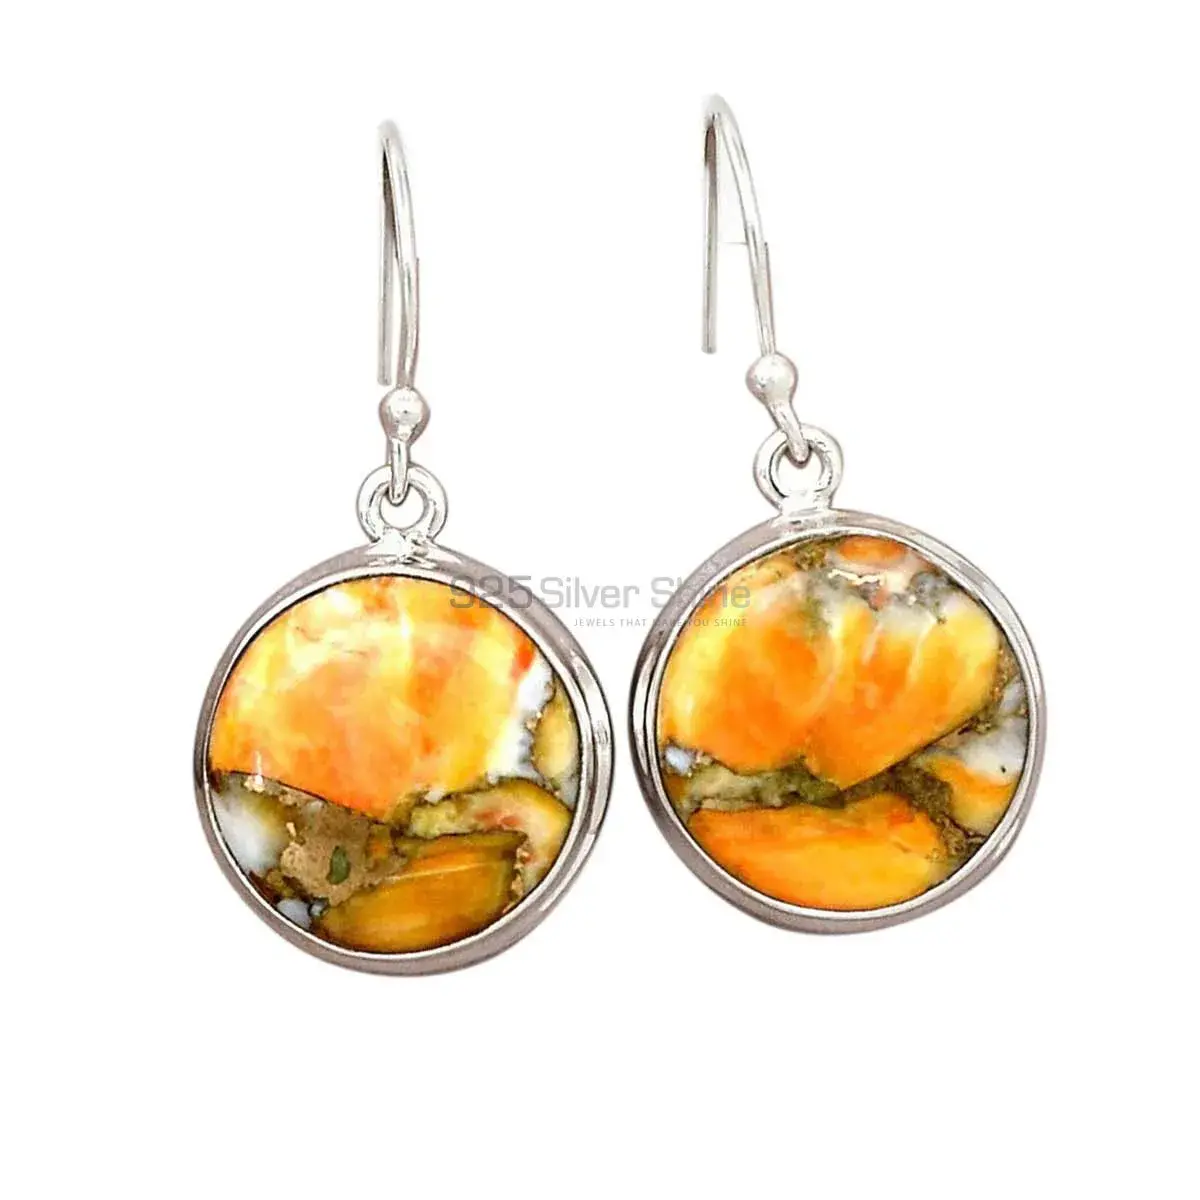 Solid 925 Silver Earrings In Natural Bumble Bee Gemstone 925SE2570